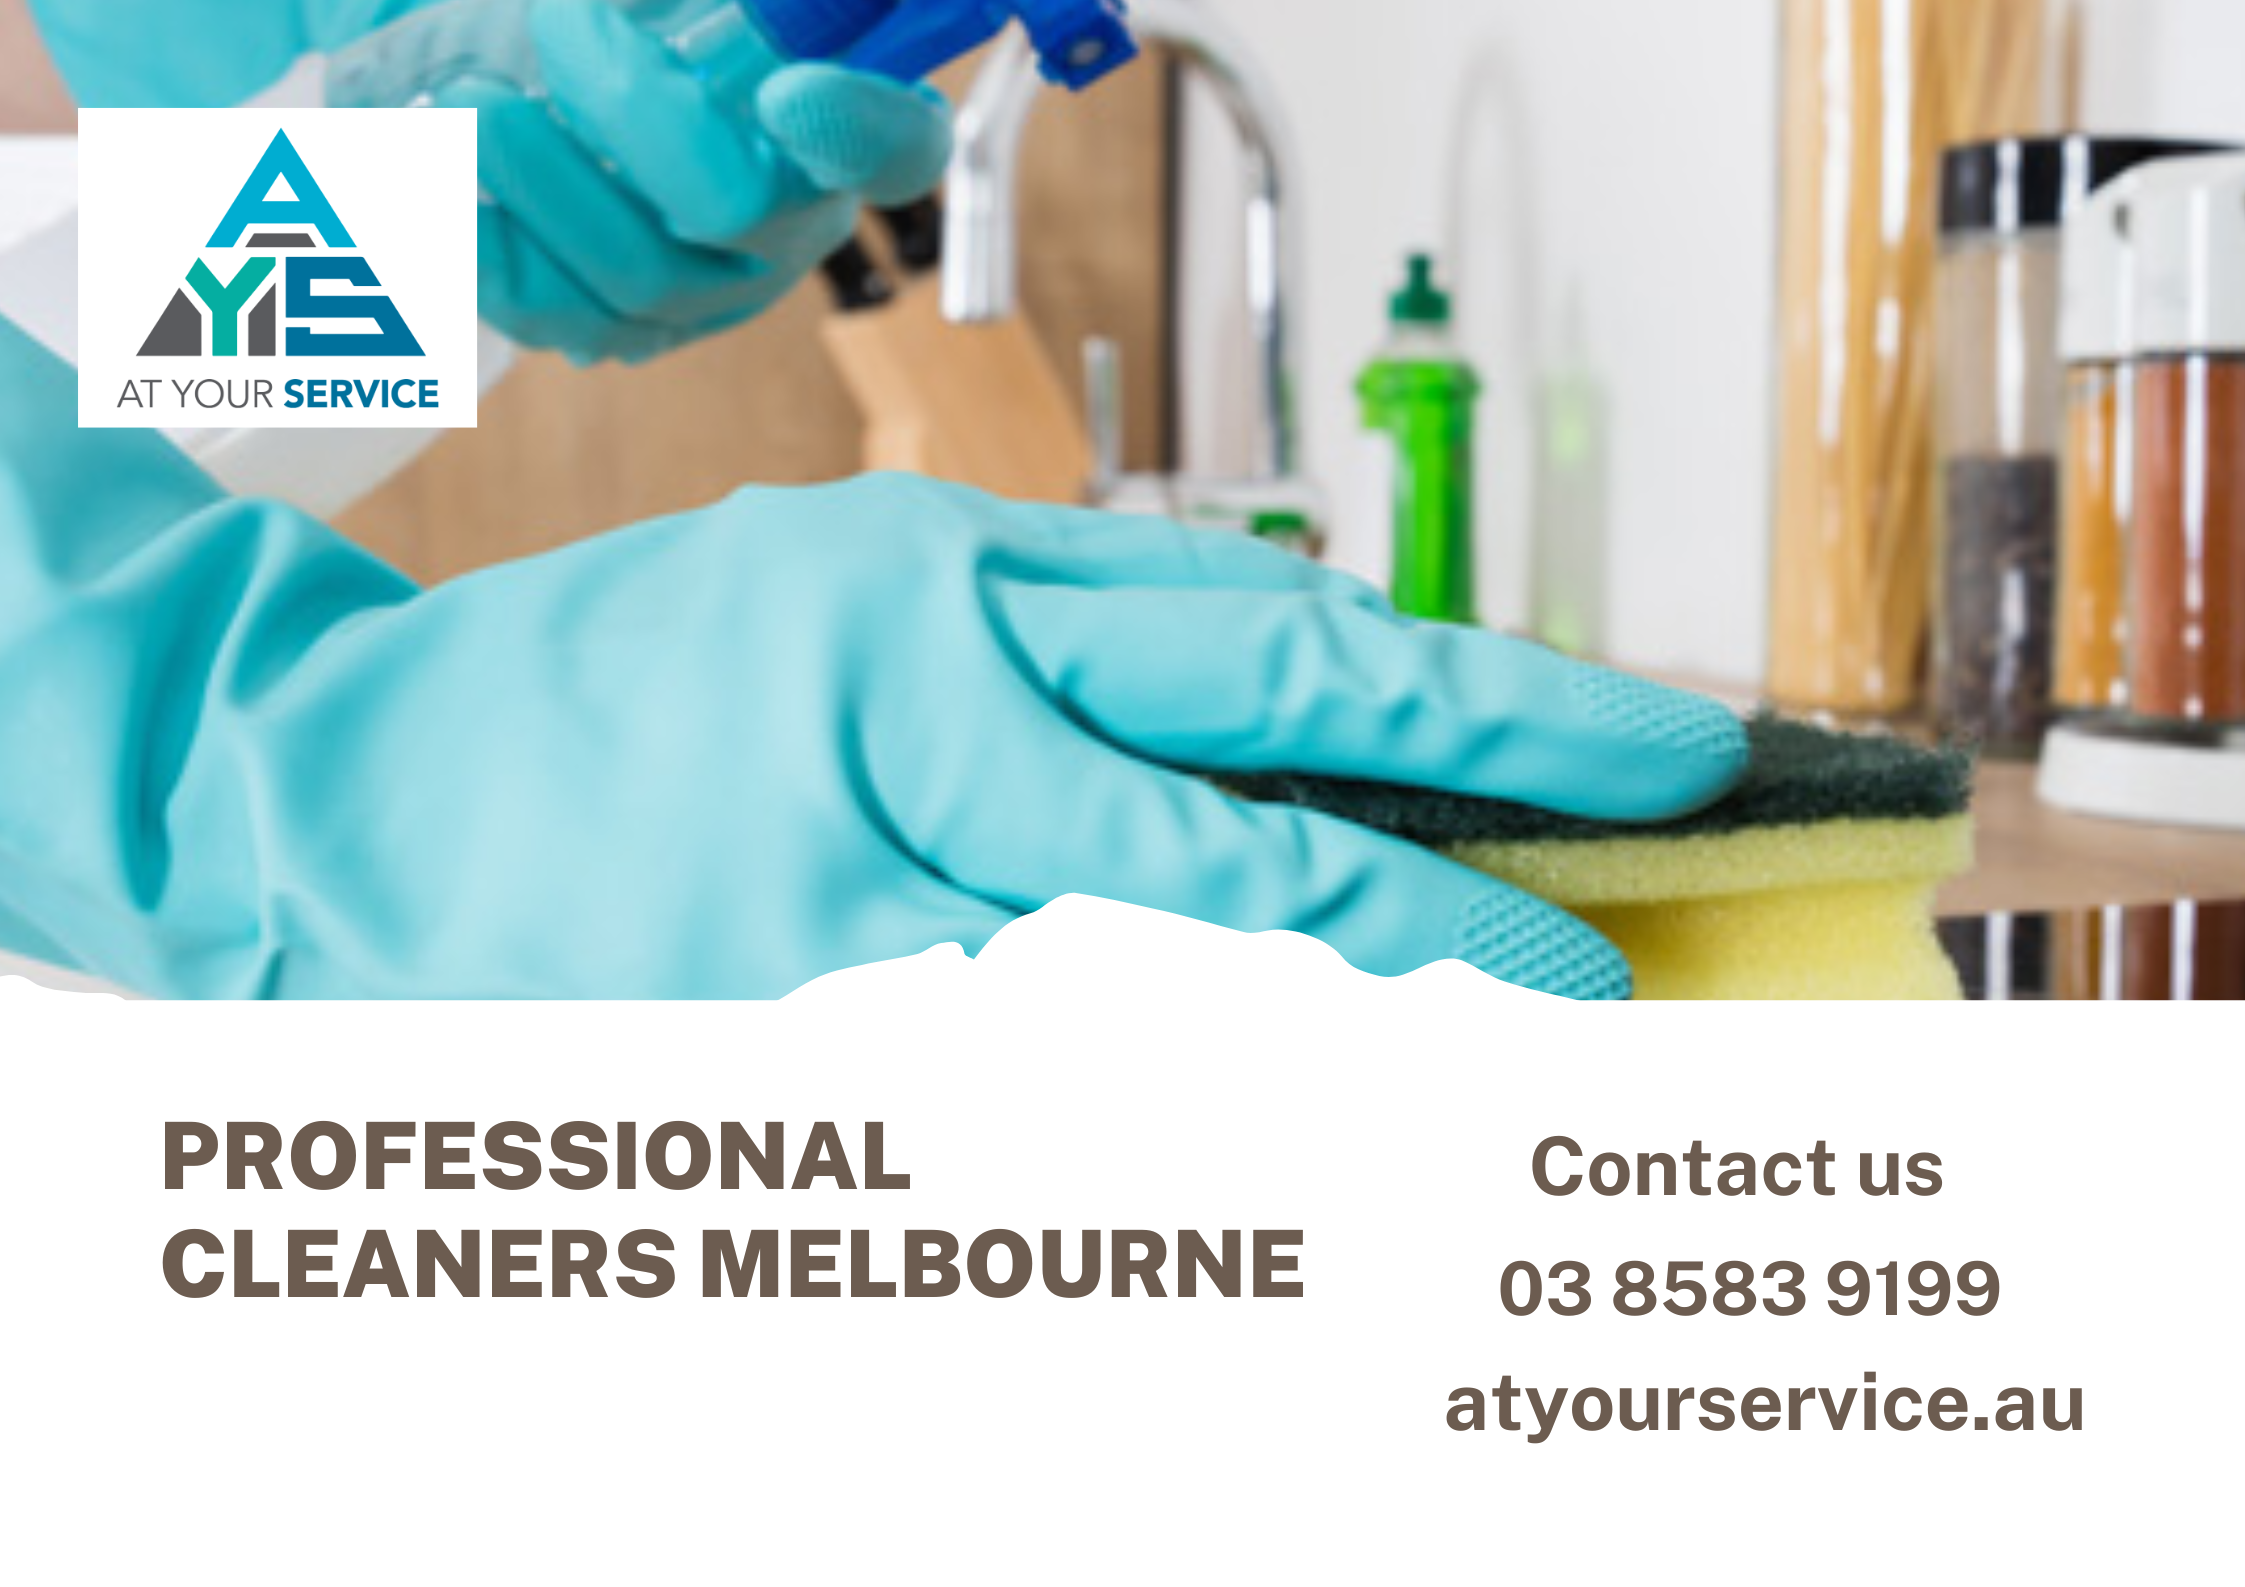 Safest Professional Cleaners in Melbourne You Can Trust - Gifyu